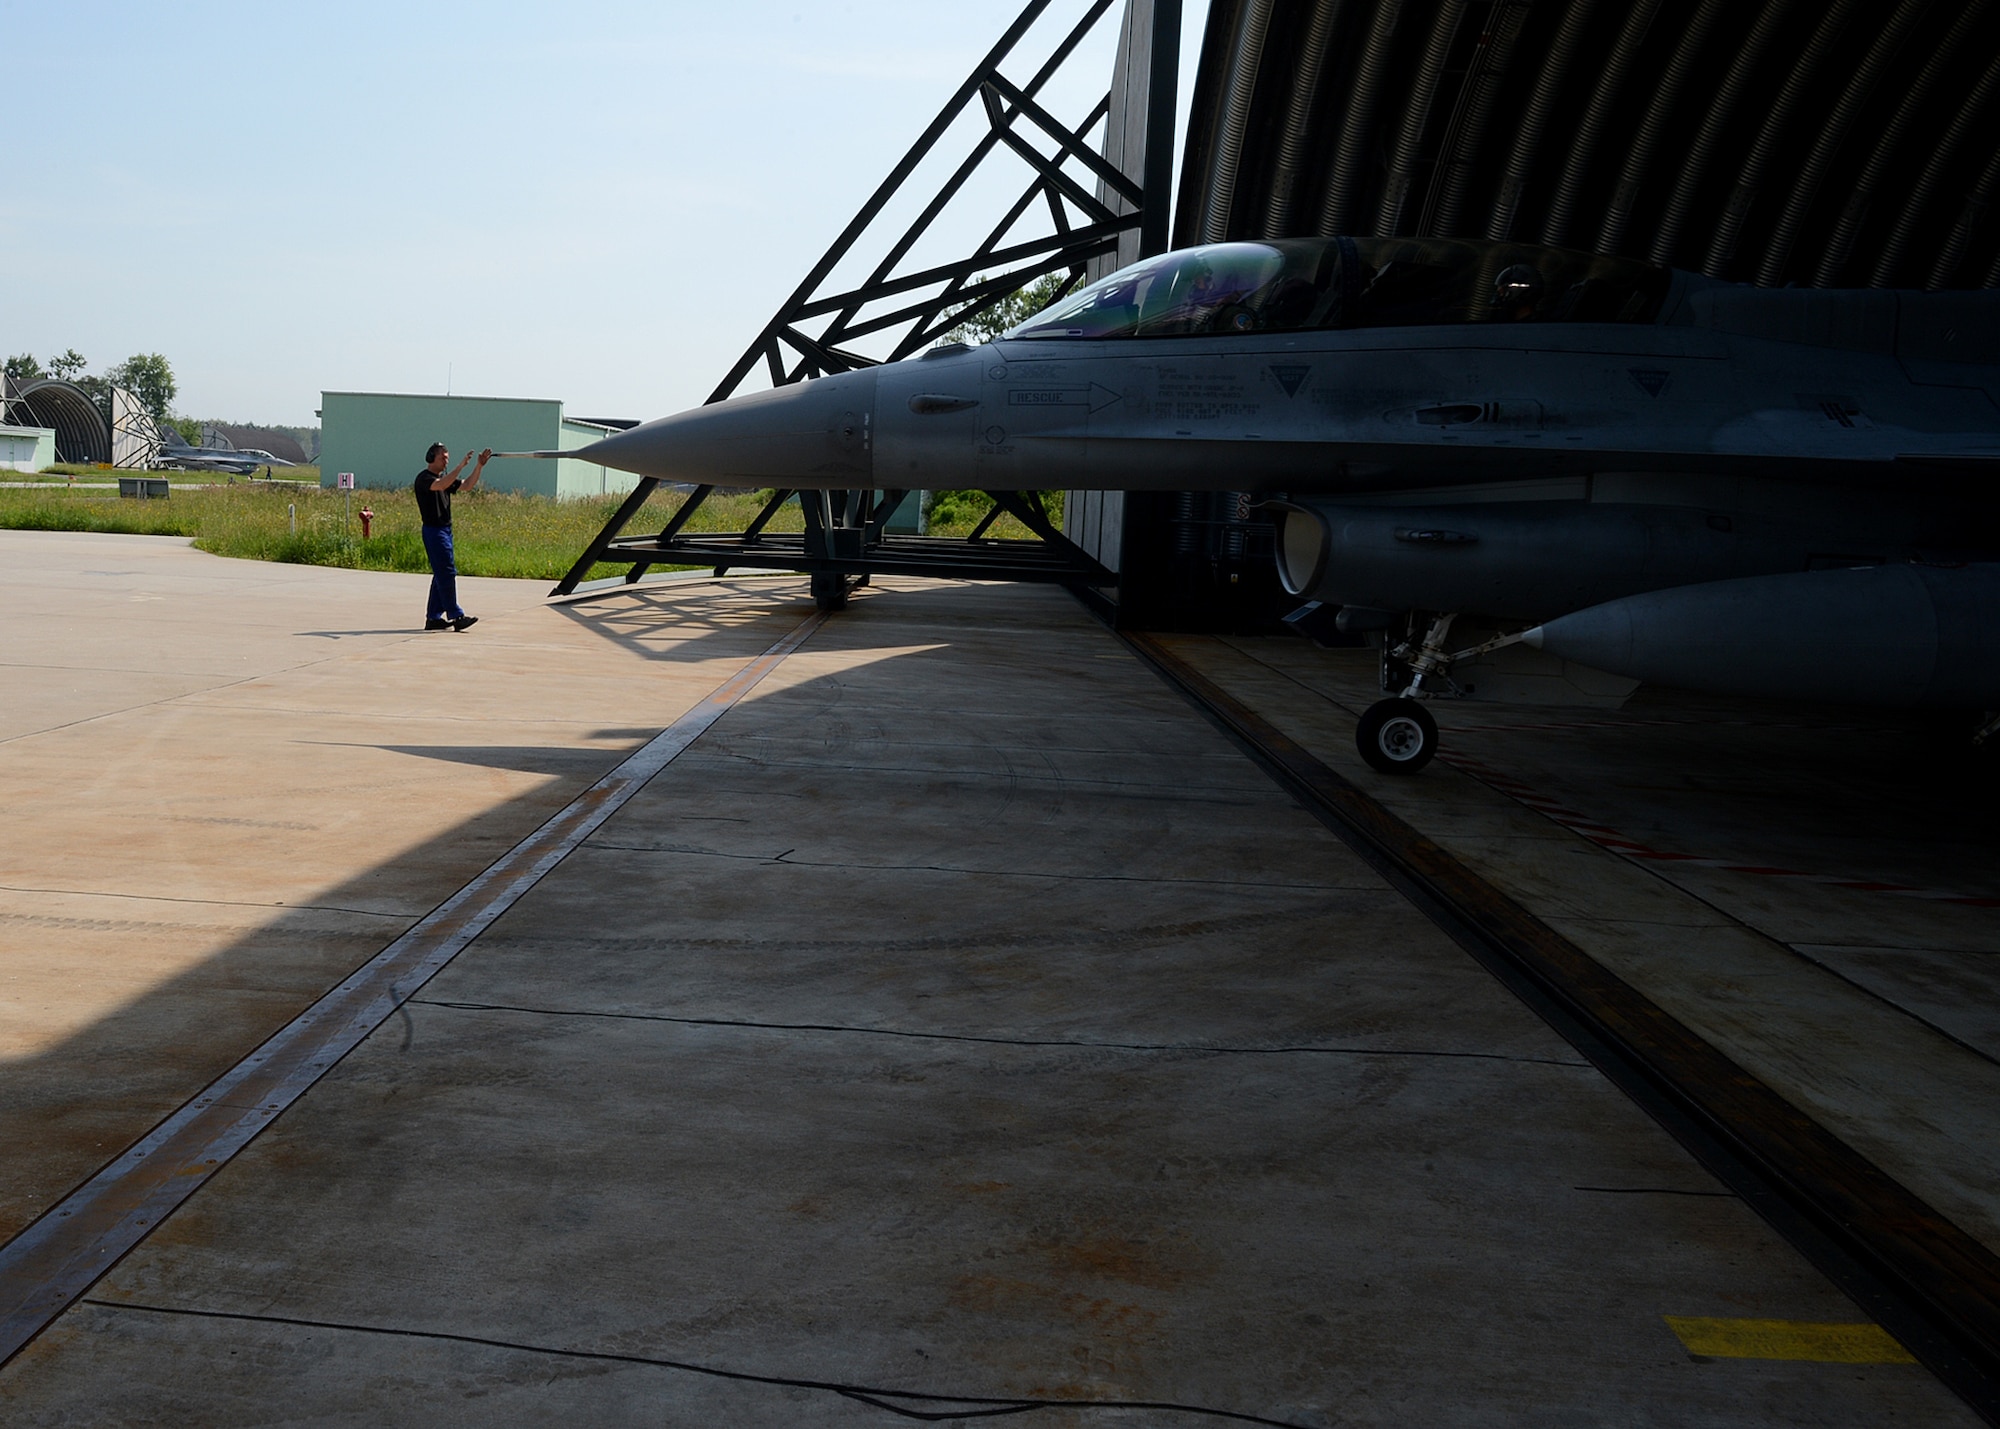 Polish air force Warrant Officer Cichecki Martin, crew chief, taxies a Polish air force F-16 Fighting Falcon fighter aircraft during Exercise EAGLE TALON at Lask Air Base, Poland, June 10, 2014. Exercise EAGLE TALON enhances pilots’ abilities to operate with NATO allies, accomplish large force formations and execute air-to-air and air-to-surface missions. (U.S. Air Force photo by Airman 1st Class Kyle Gese/Released)